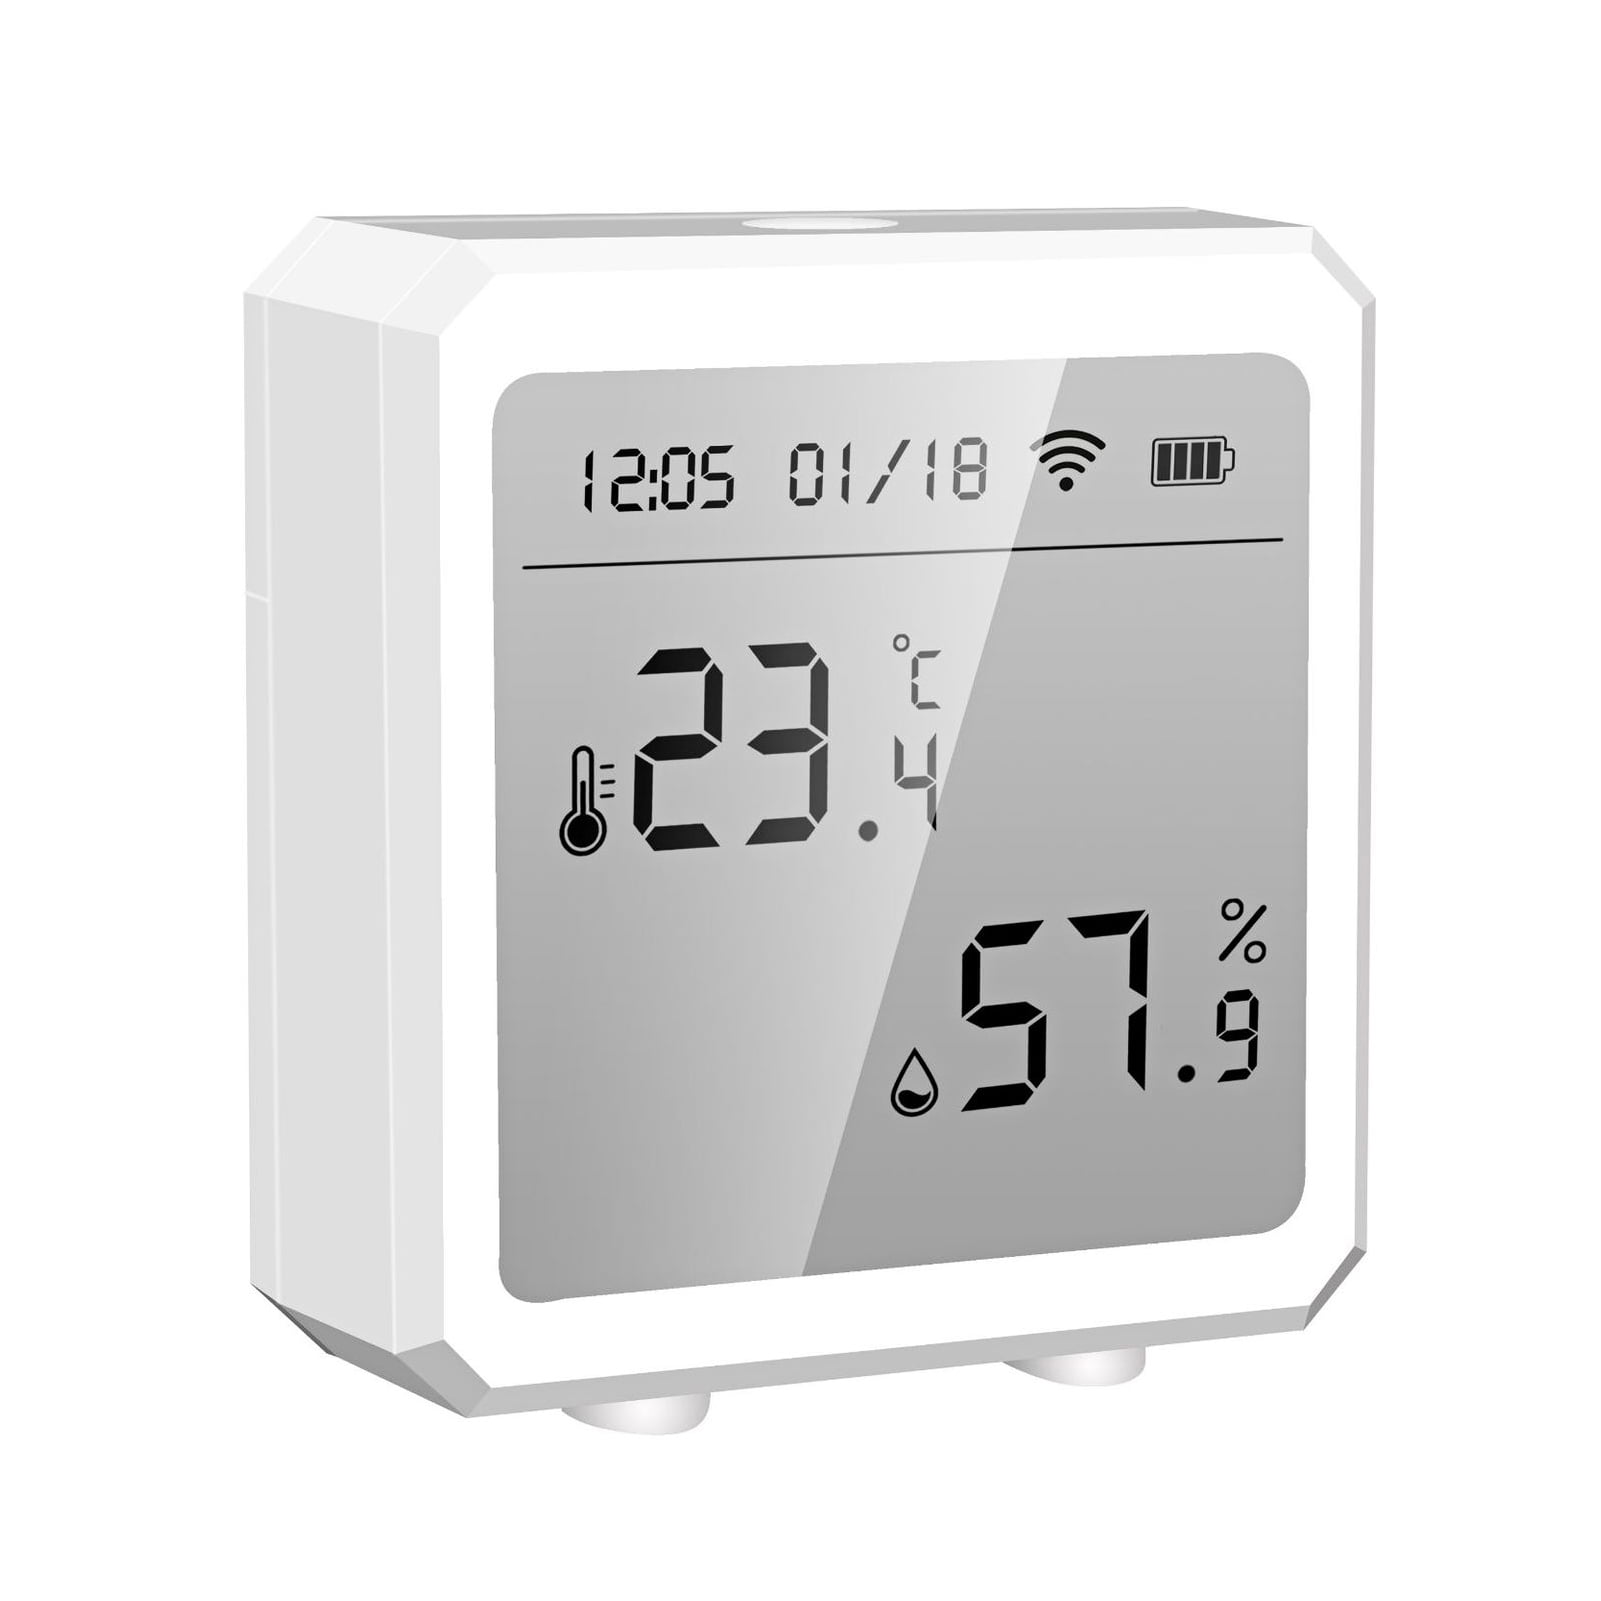 House Greenhouse Indoor Digital Humidity Thermometer Monitor Wireless 